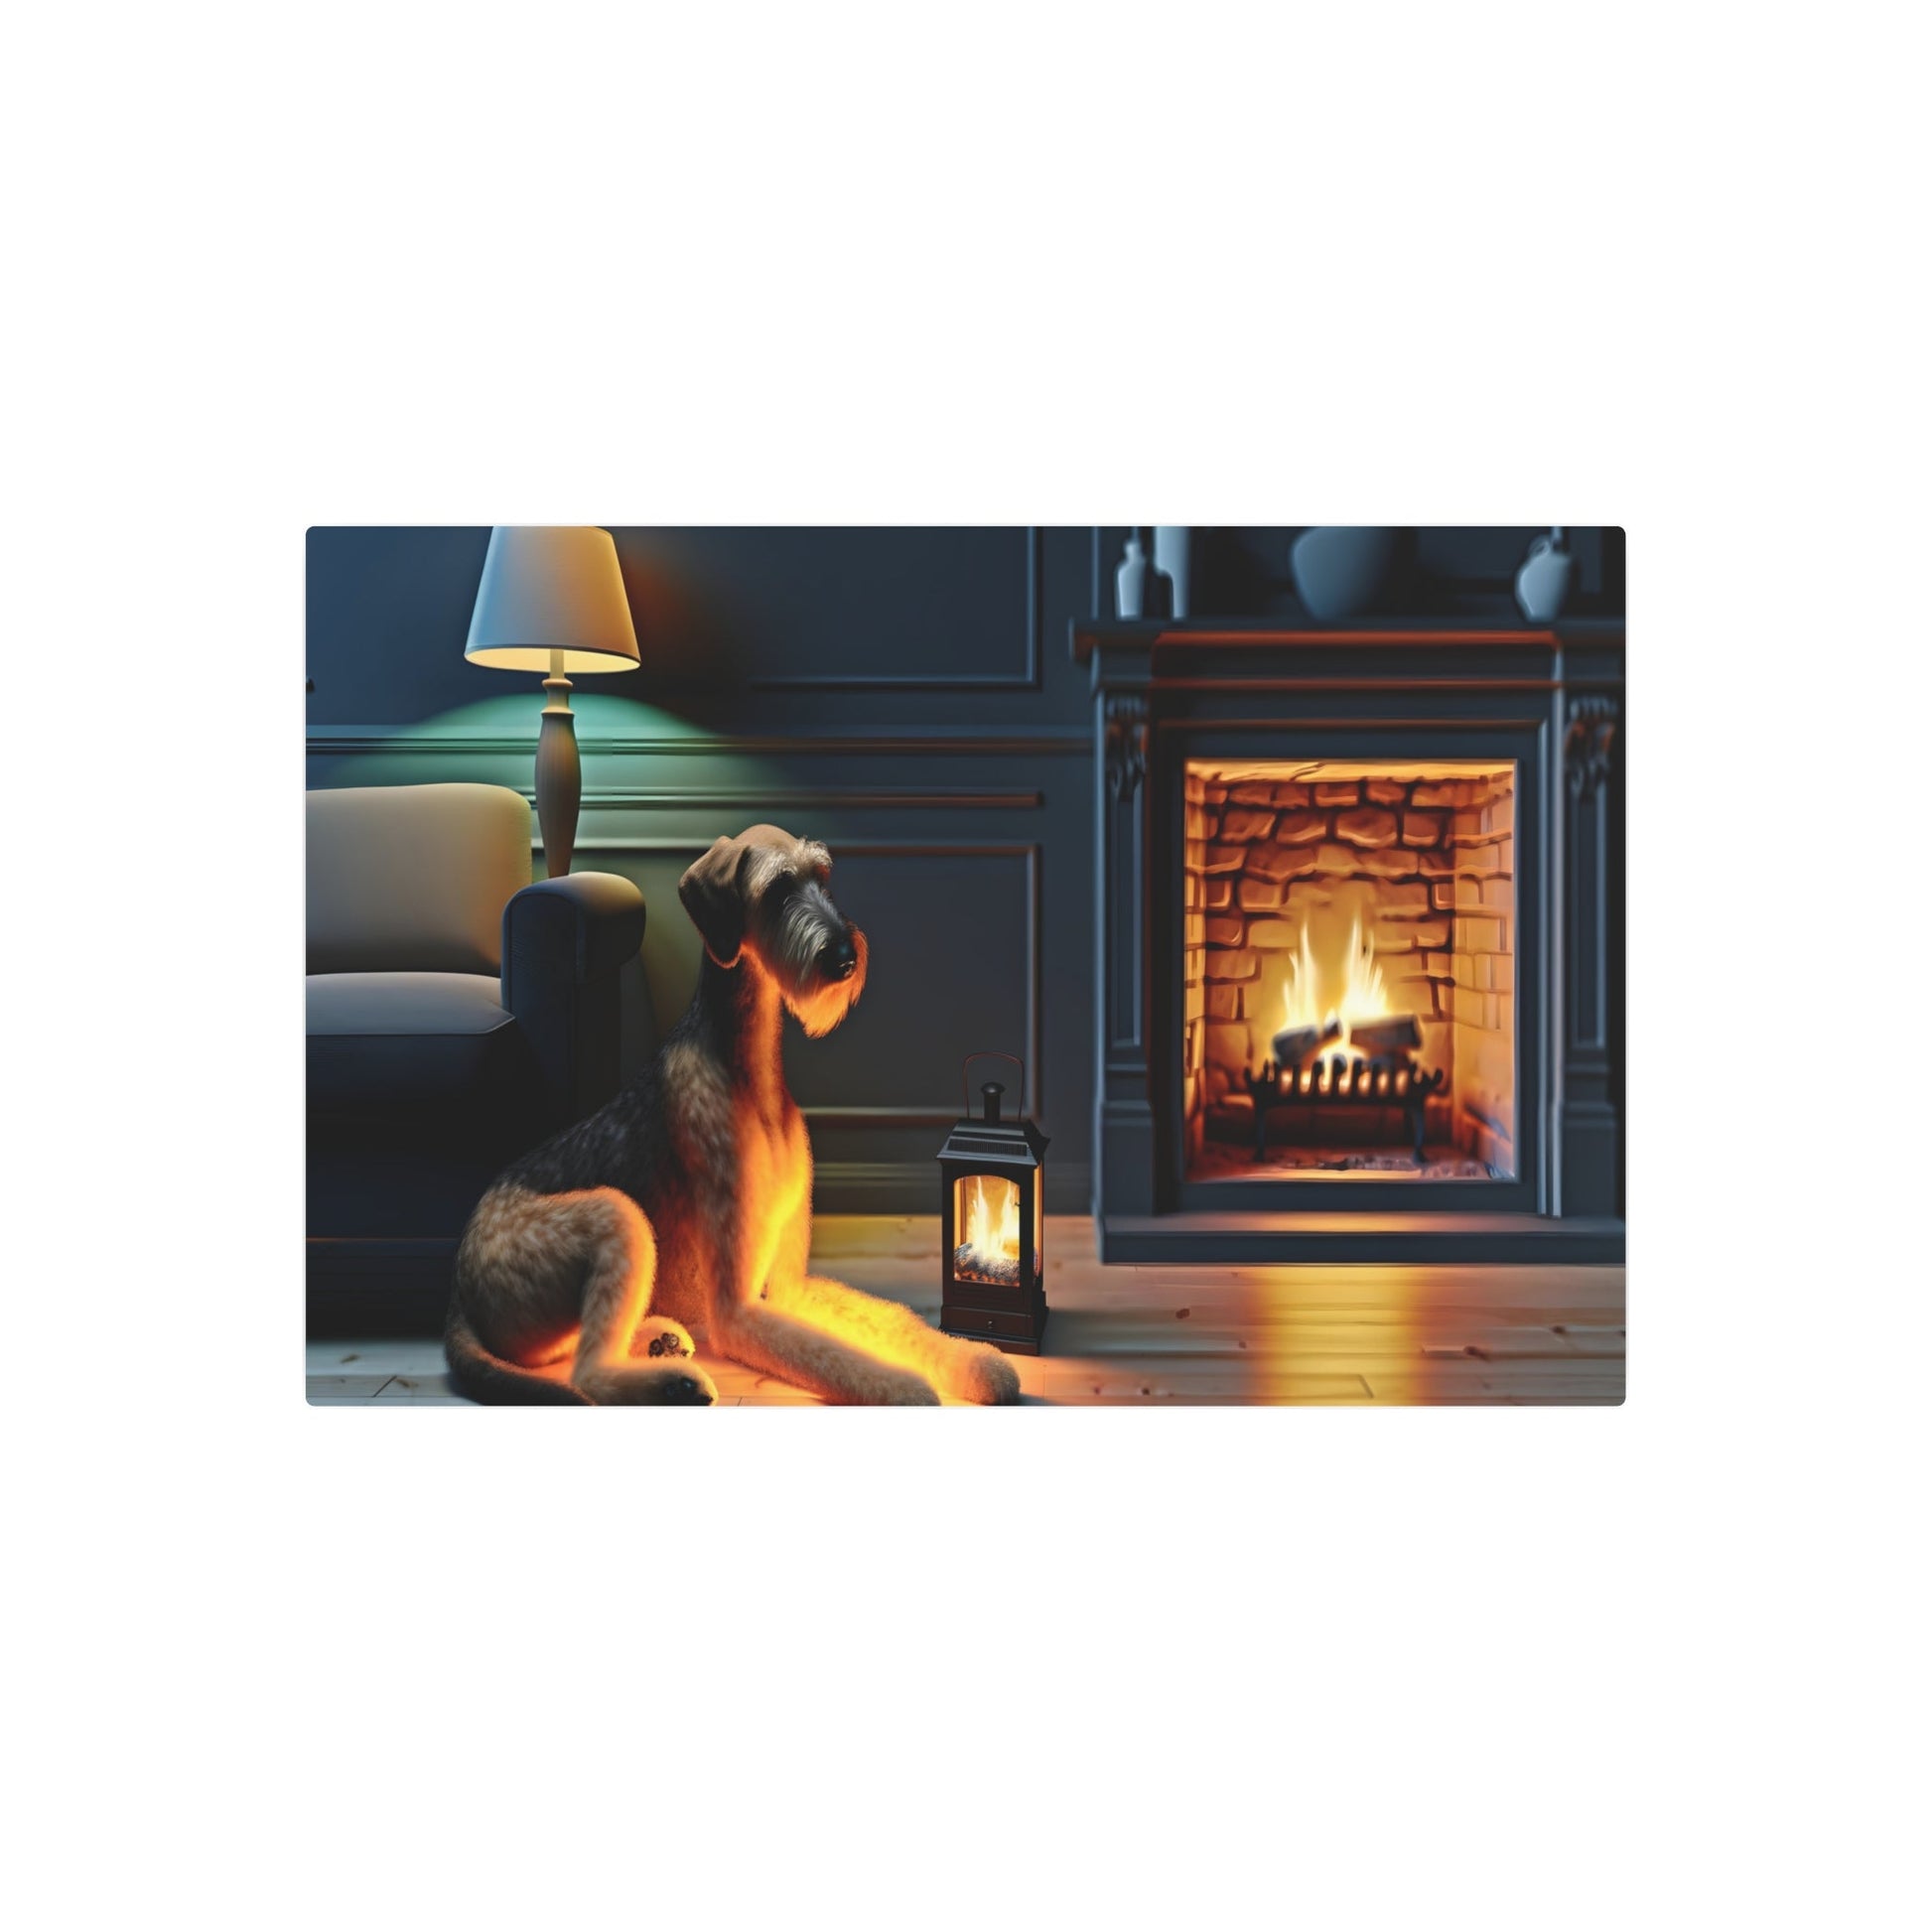 Metal Poster Art | "Realistic Western Art Style Dog by Fireplace - Detailed Realism Artwork Emphasizing Texture and Lighting" - Metal Poster Art 36″ x 24″ (Horizontal) 0.12''